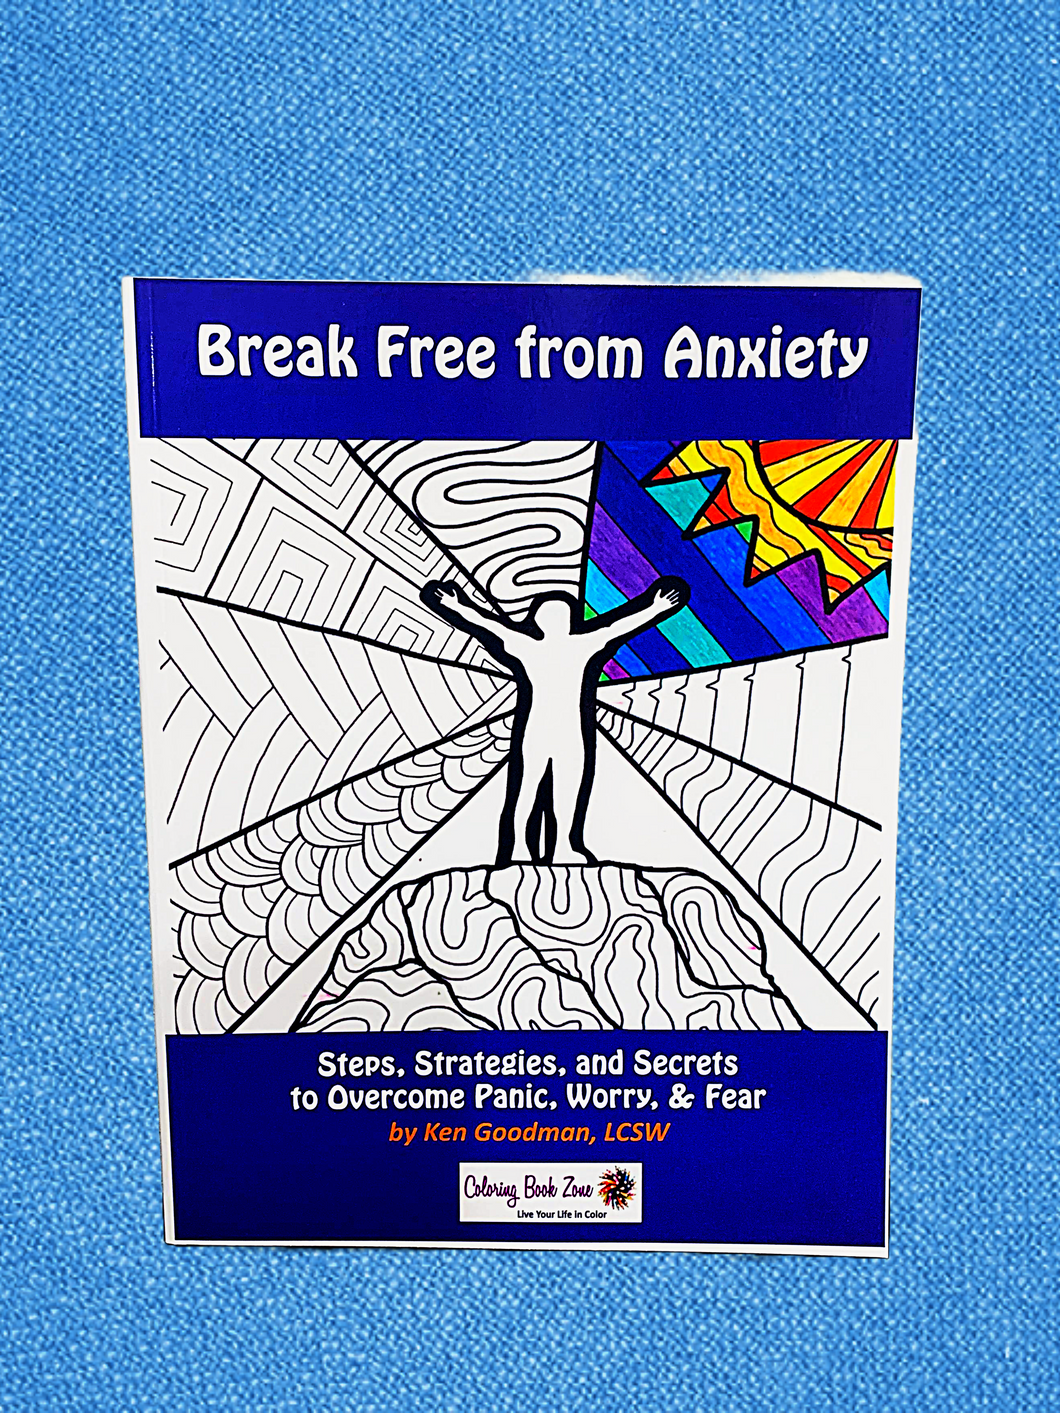 Break Free From Anxiety - The Steps, Strategies, and Secrets to